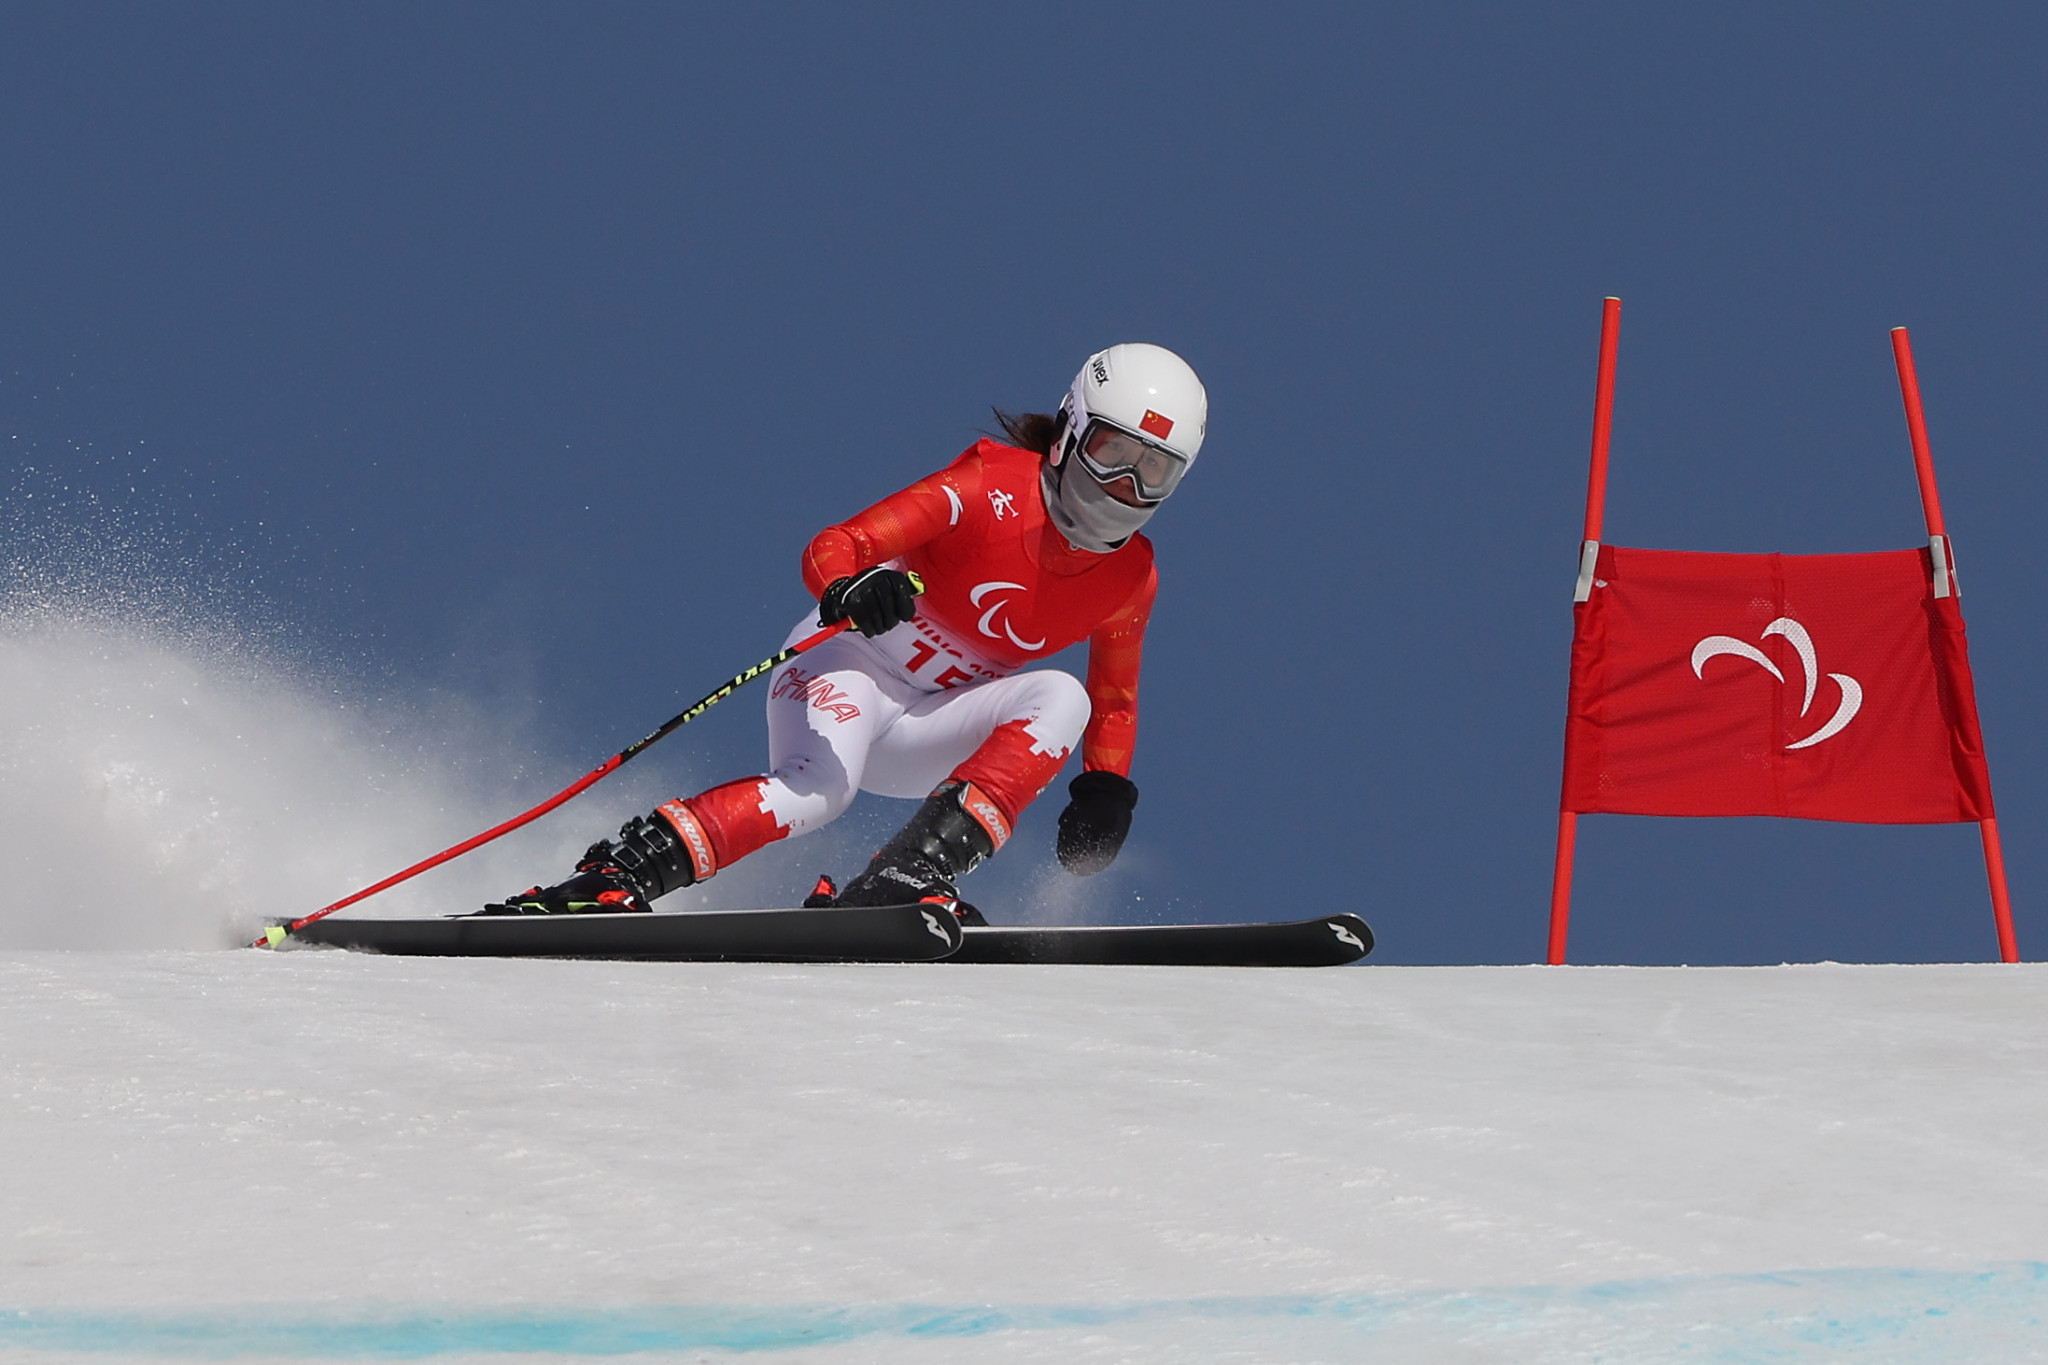 A sensational performance from Zhang Mengqiu earned China's first ever Para Alpine skiing gold medal at the Winter Paralympics ©Getty Images